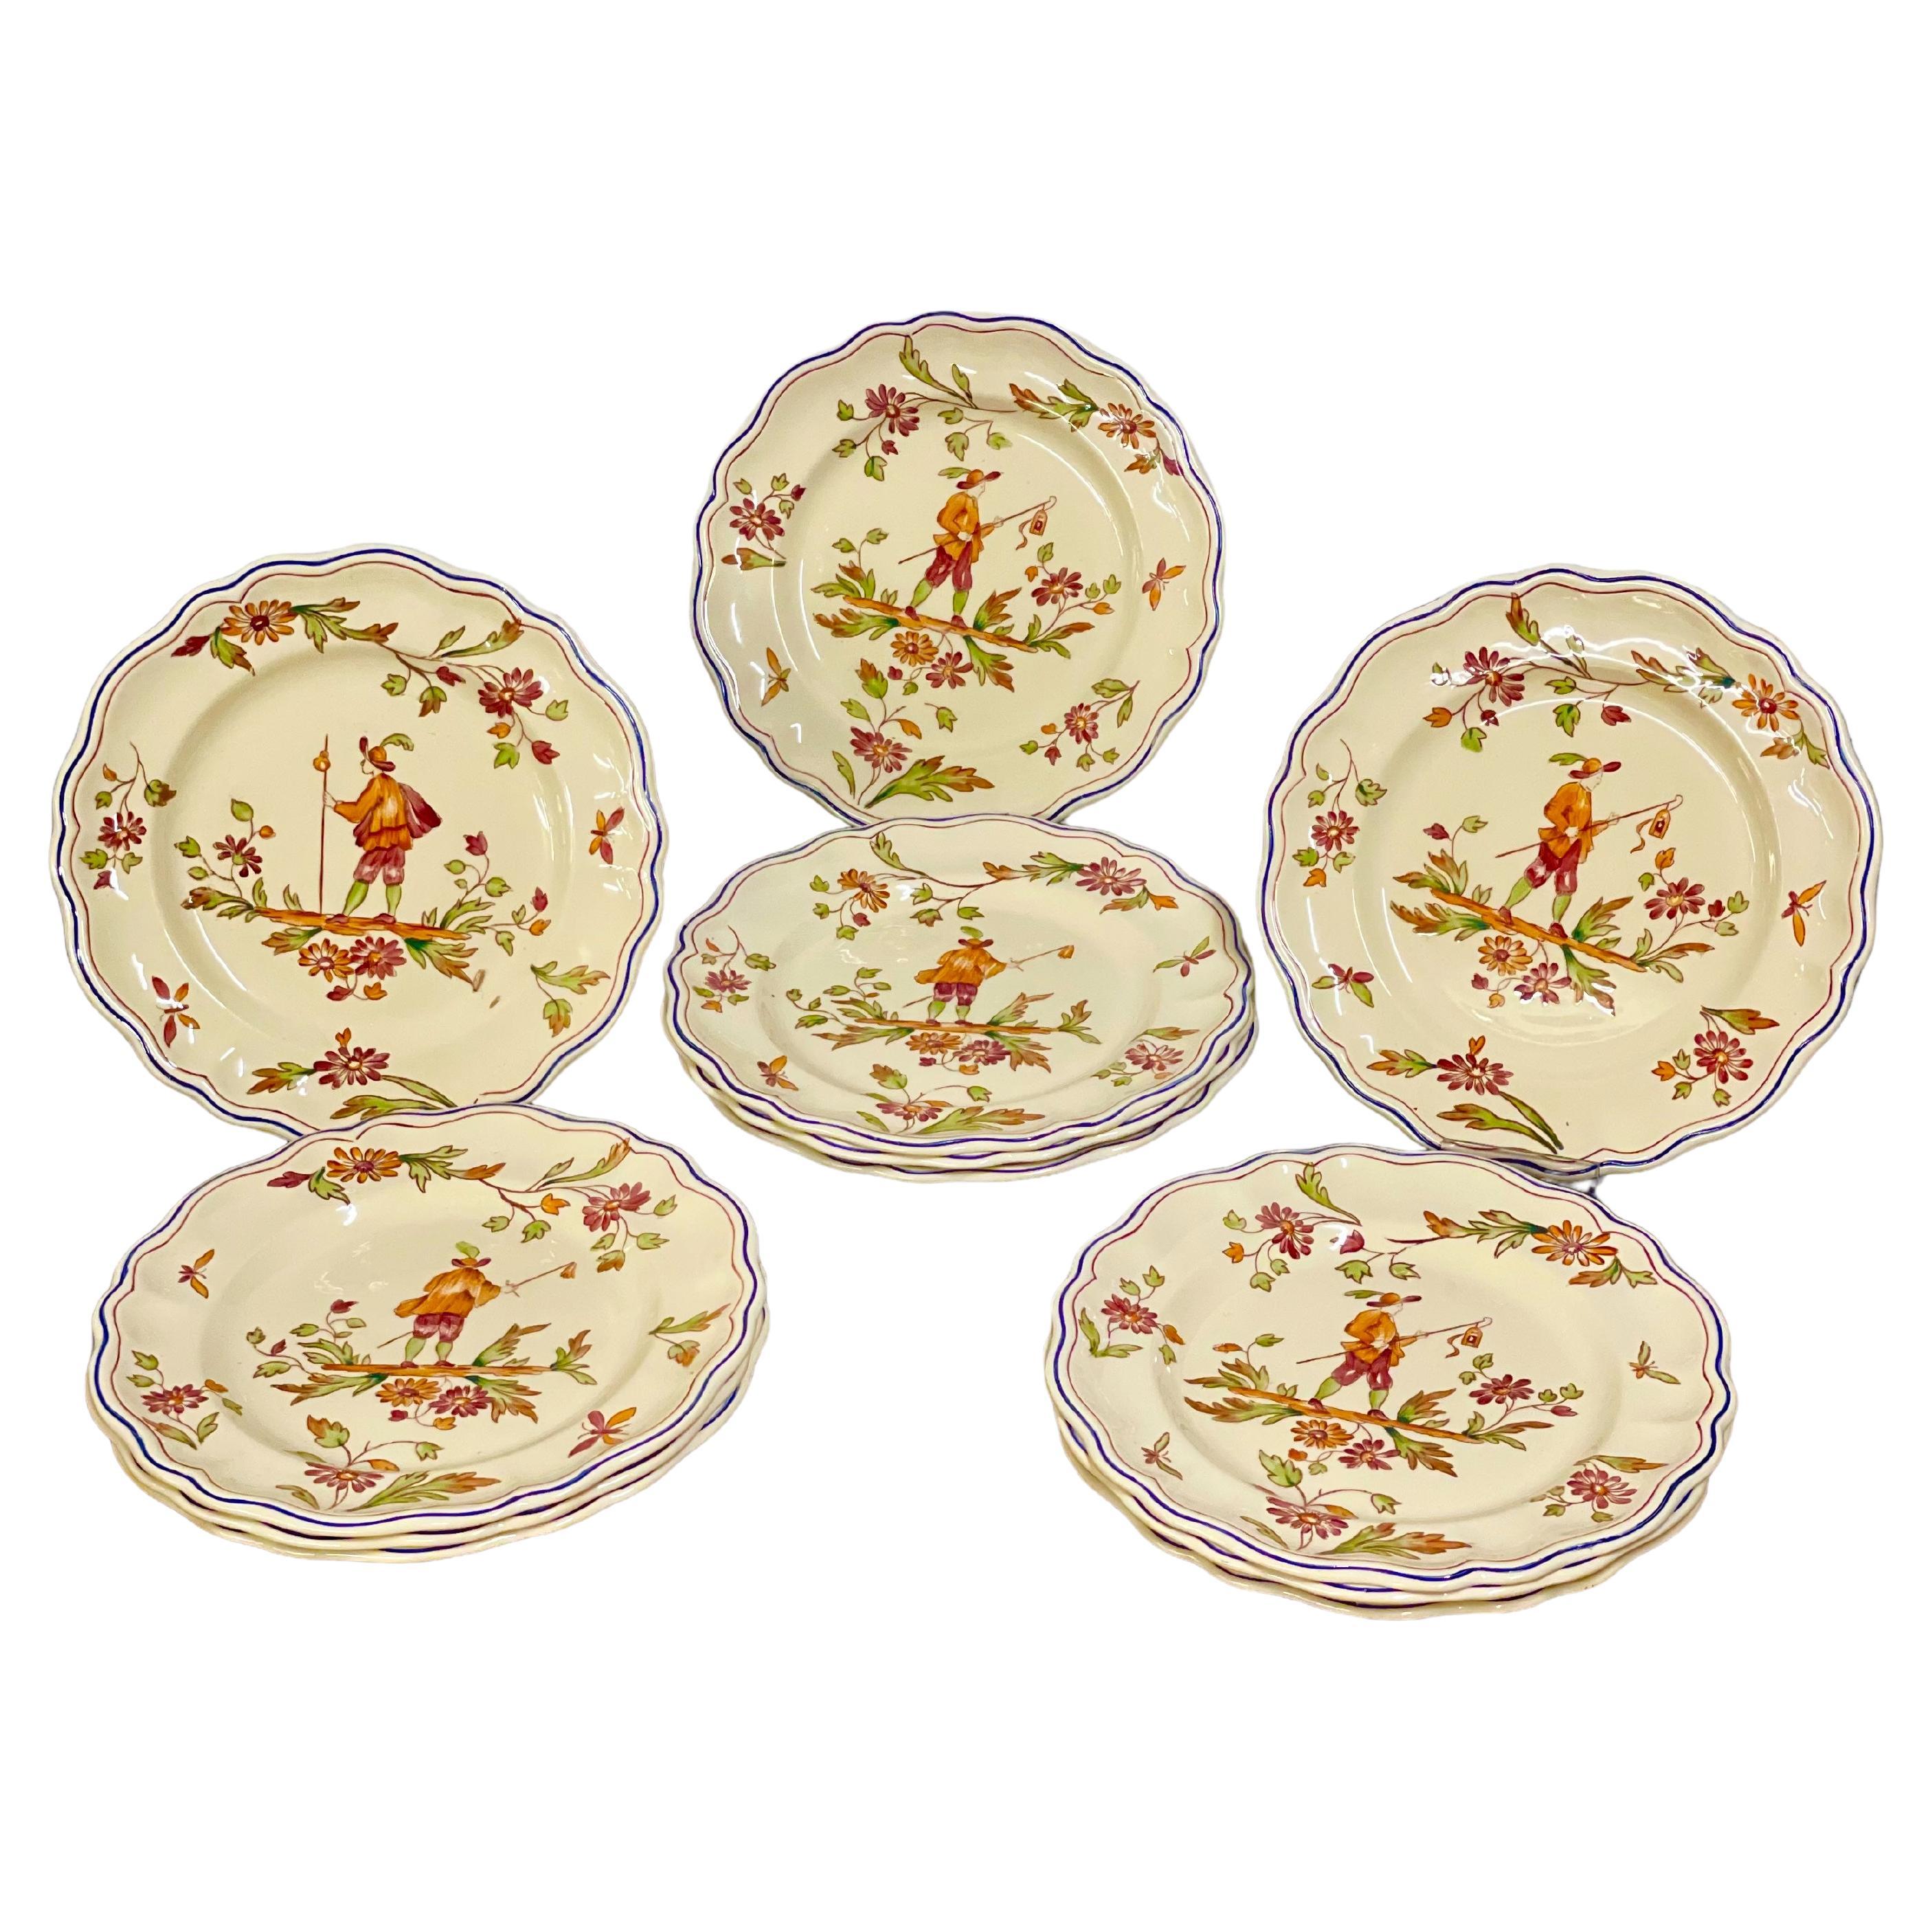 12 Dinner Plates 'Moustiers' by Longchamp France For Sale